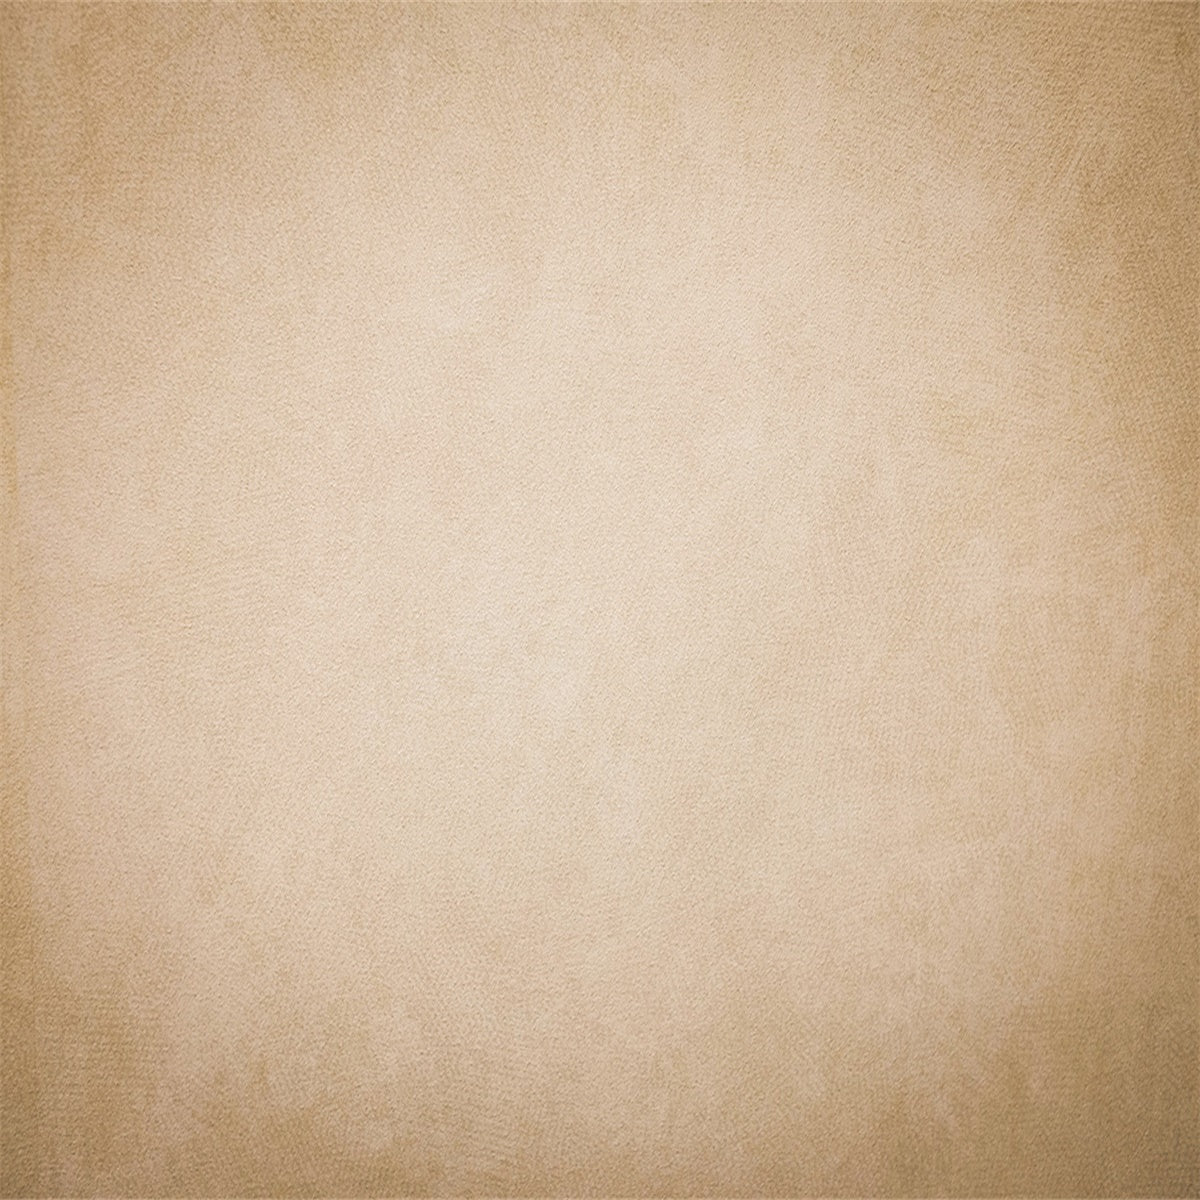 Abstract Brown White Pattern Photography Backdrops for Picture